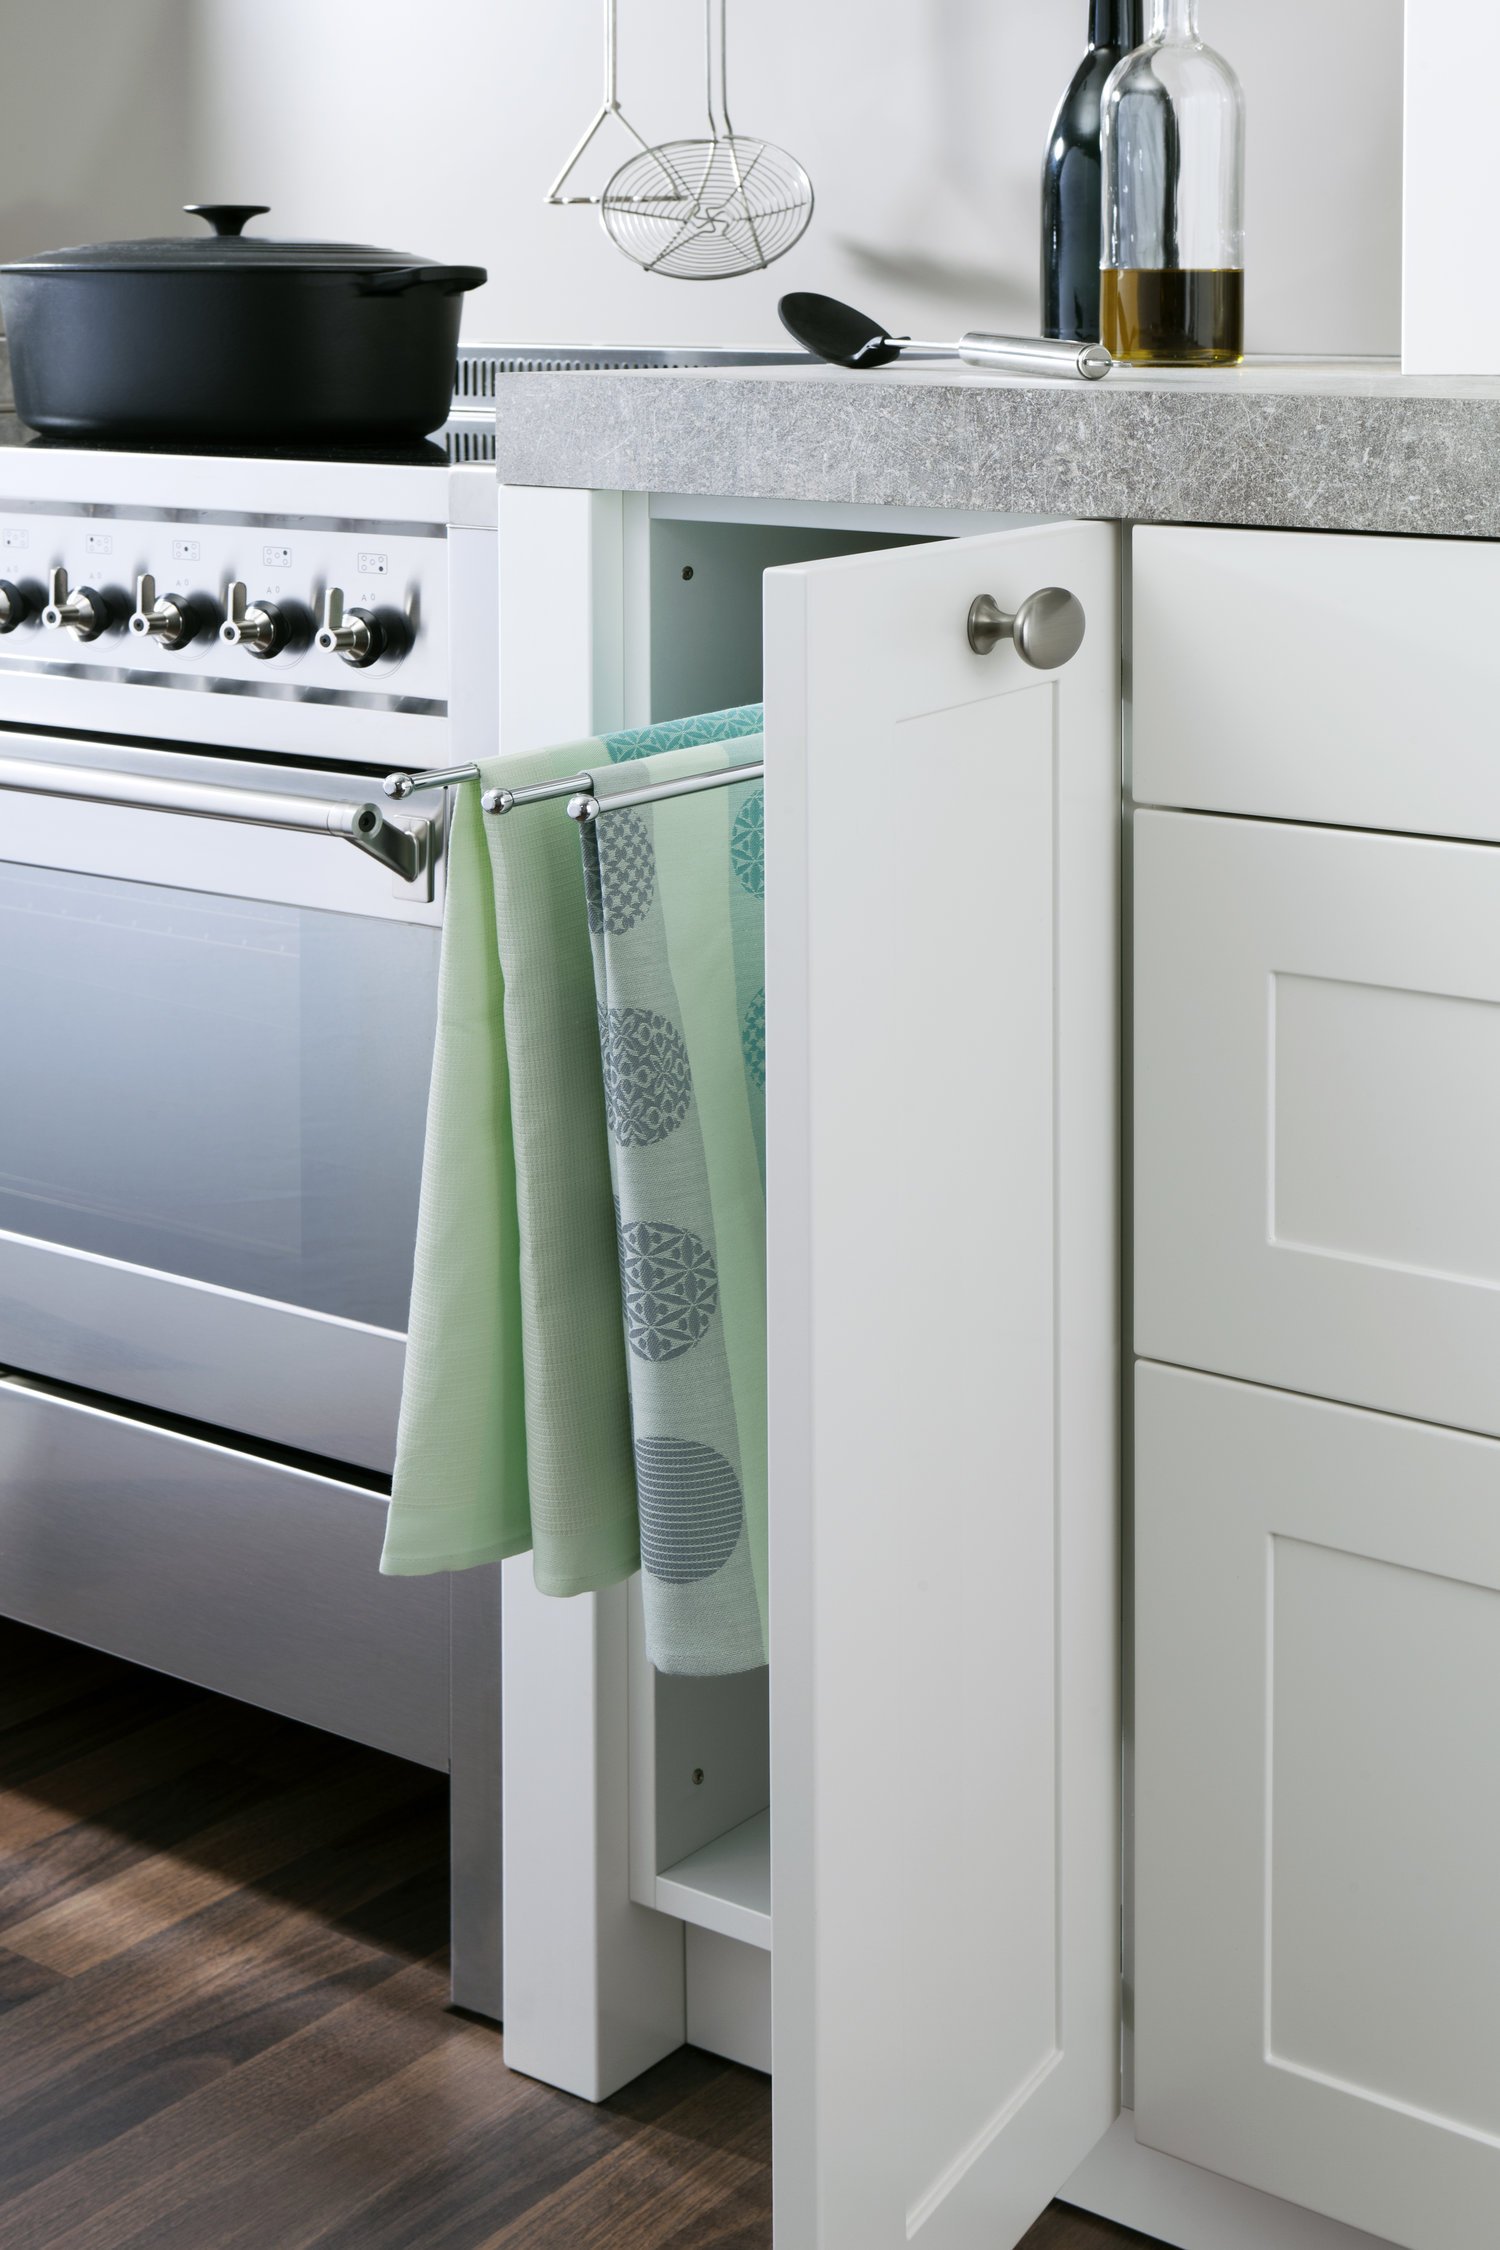 LEICHT CARRÉ-FS Connaught Kitchens cupboards storage organiser for towels.jpg